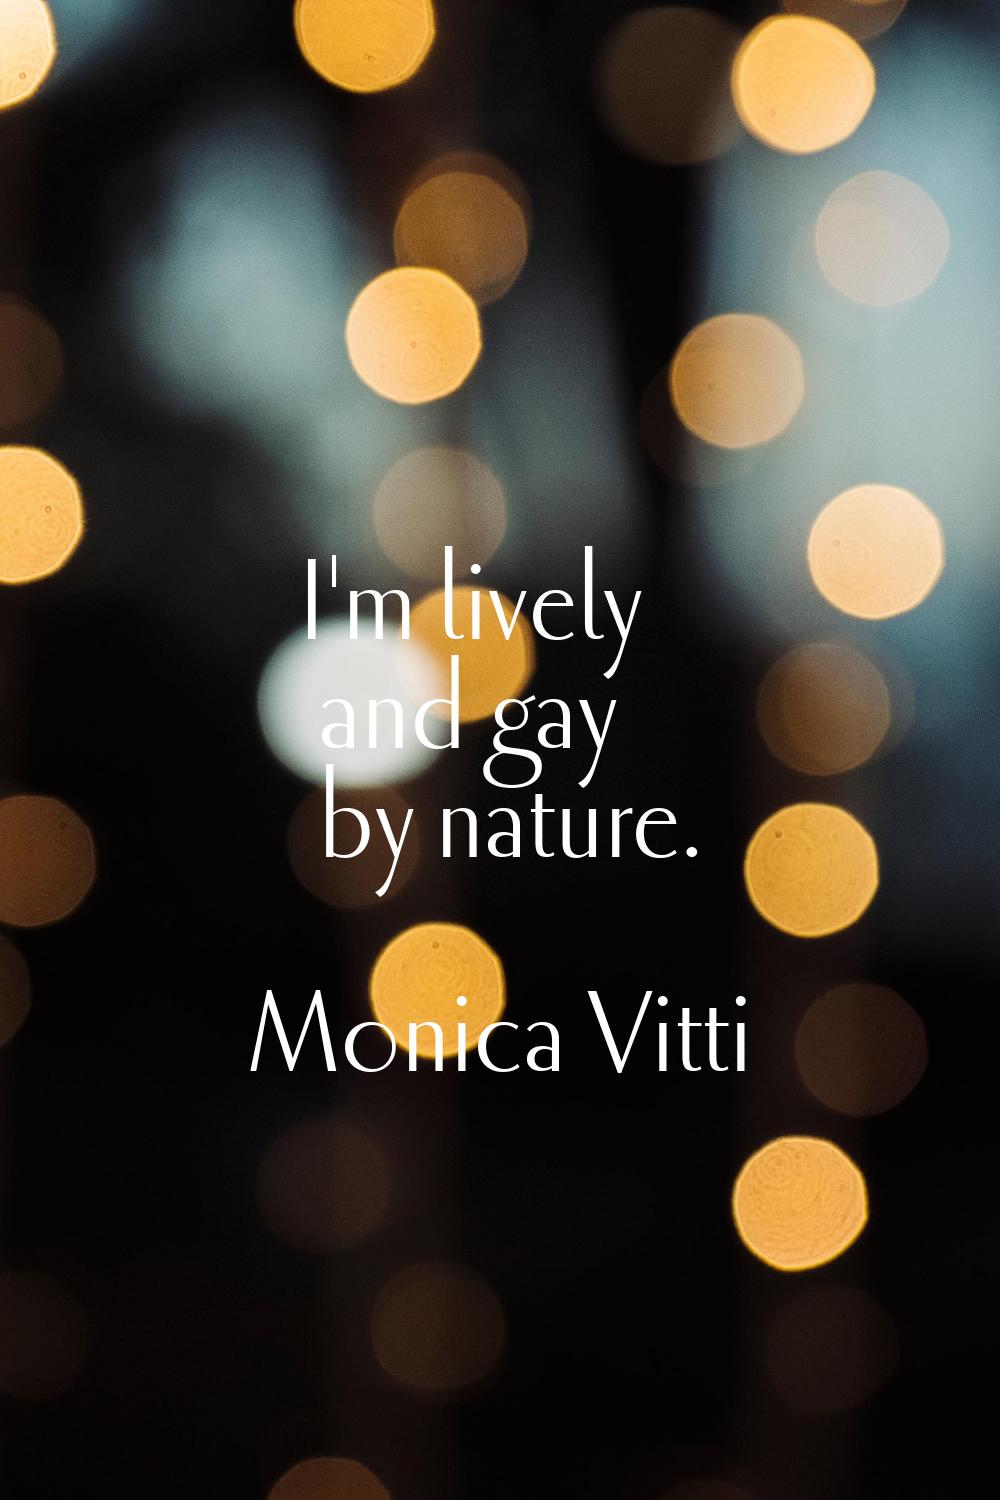 I'm lively and gay by nature.